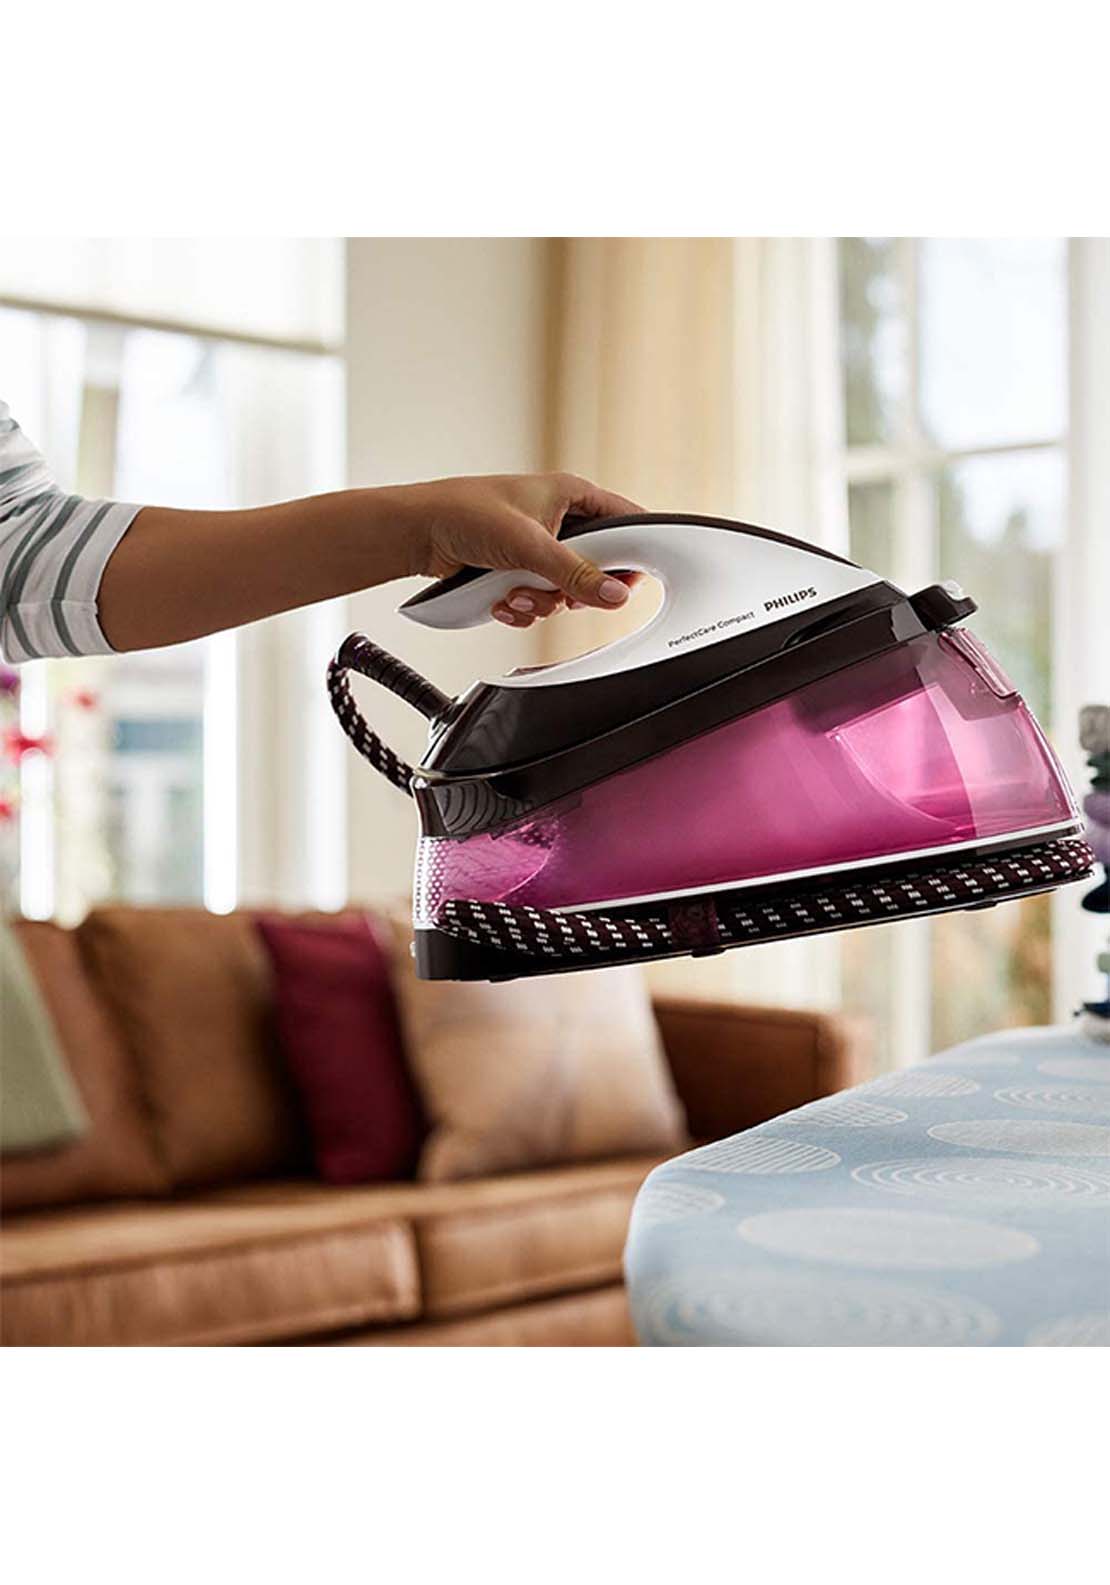 Philips PerfectCare Steam Iron | Gc784246 3 Shaws Department Stores